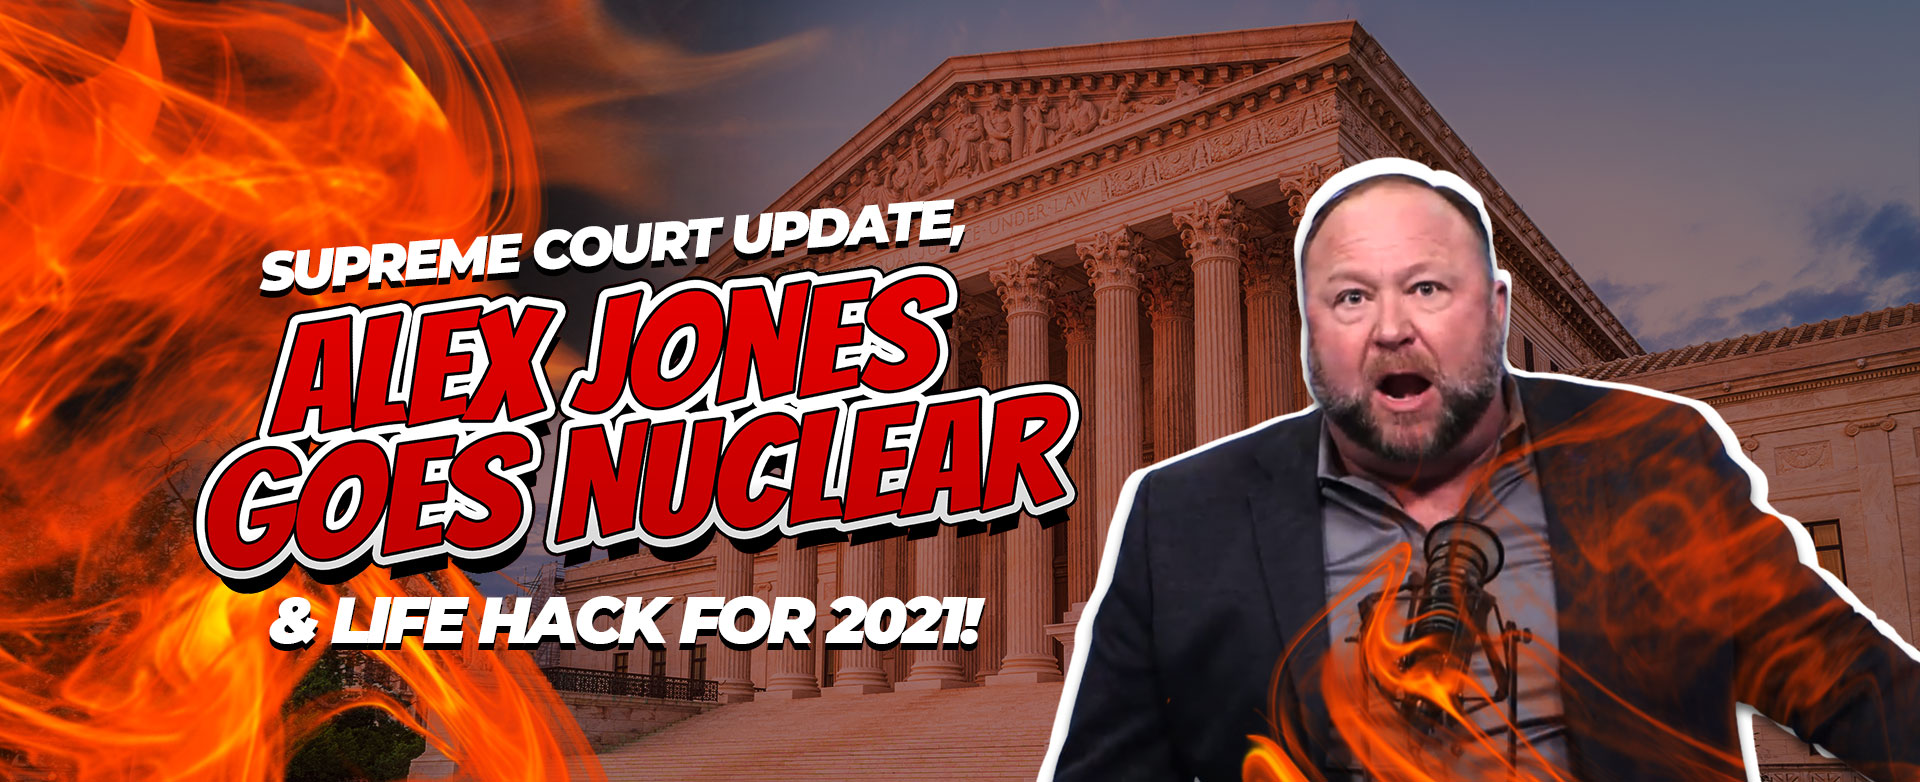 MyPatriotsNetwork-Supreme Court Update, Life Hack For 2021 & More! – February 22, 2021 Update